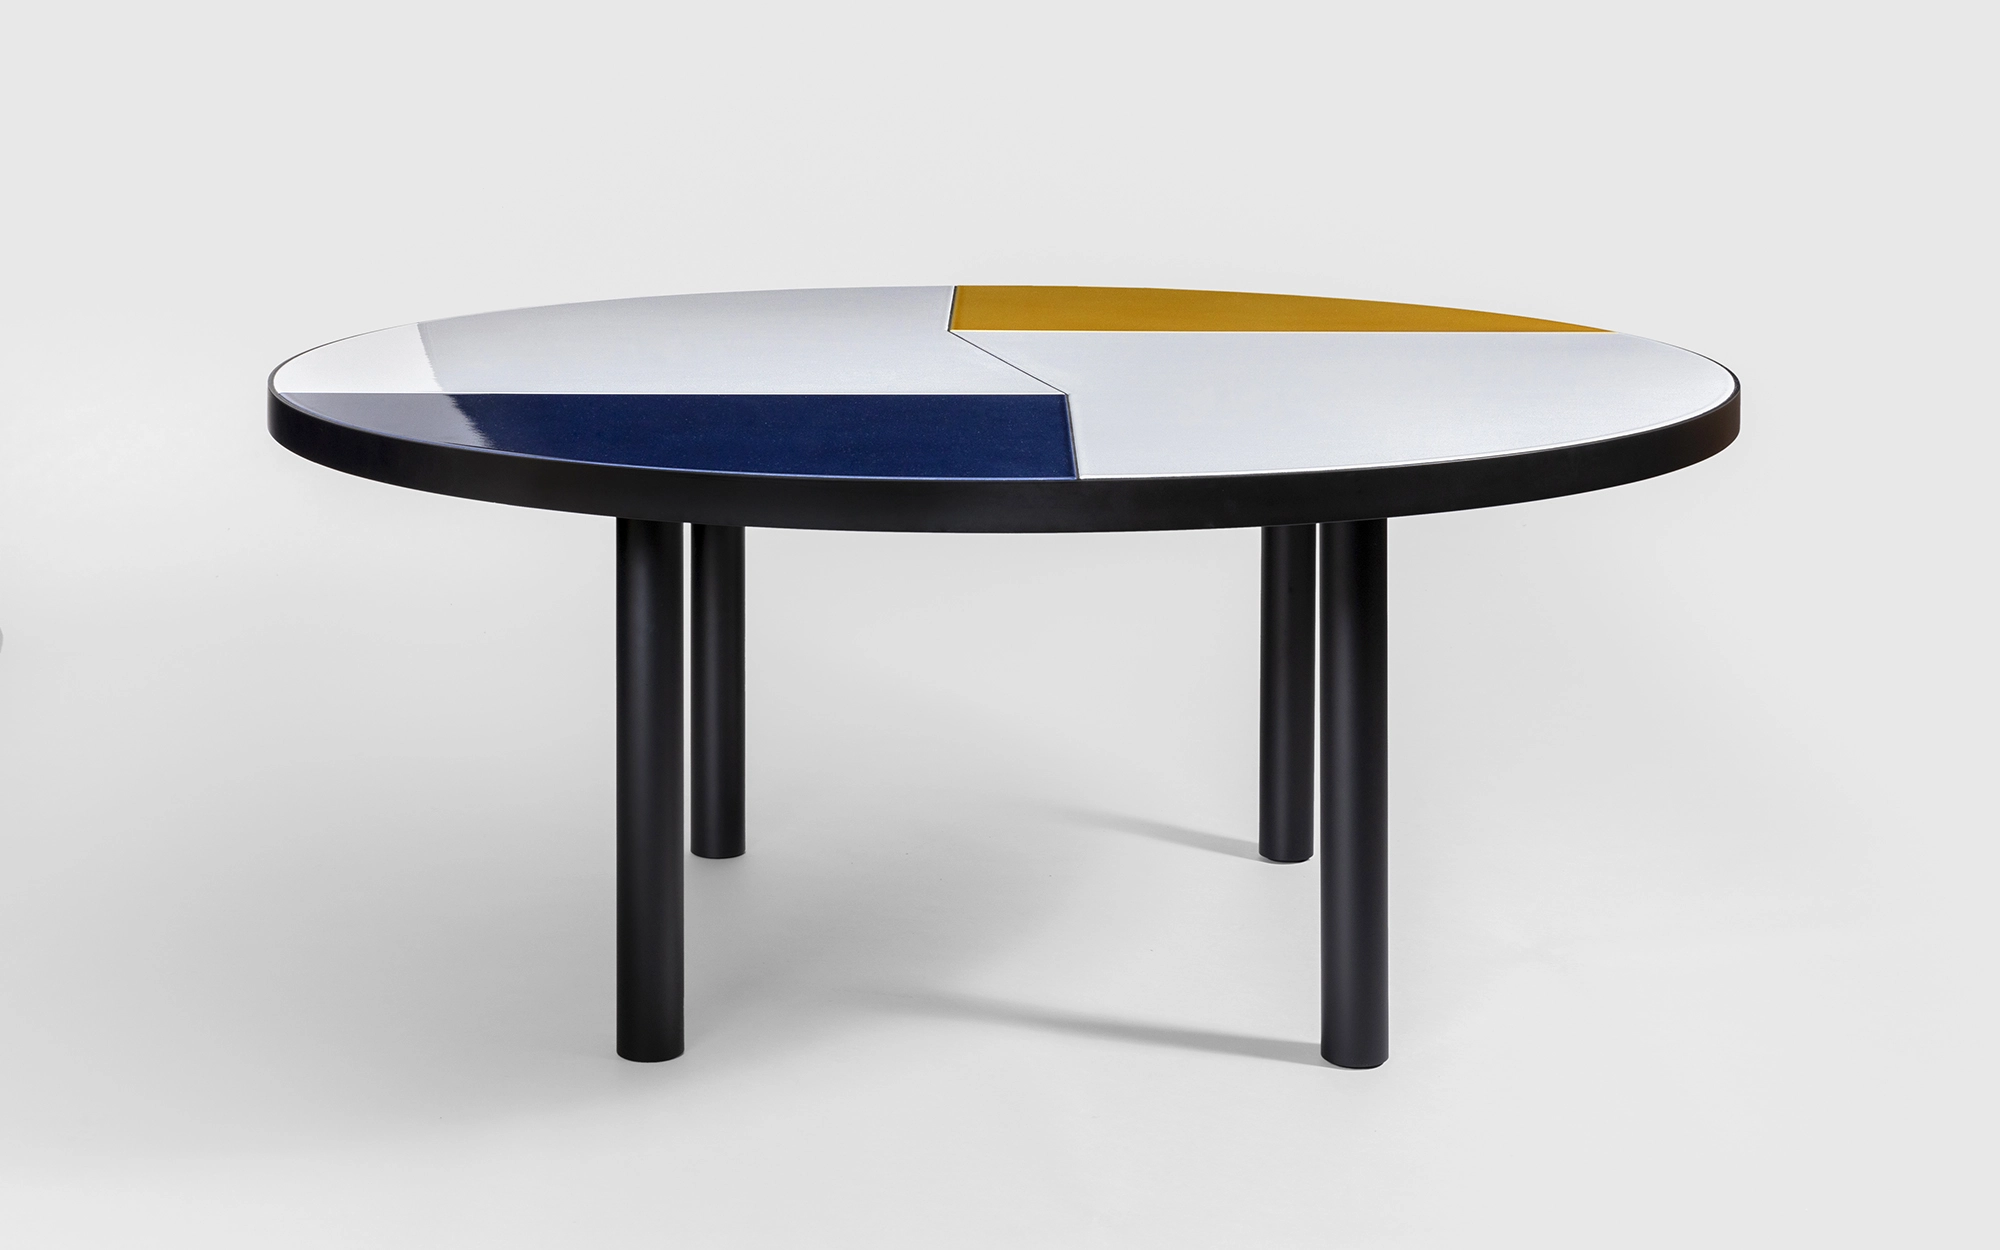 Fraction Dining Table - Pierre Charpin - Table light - Galerie kreo